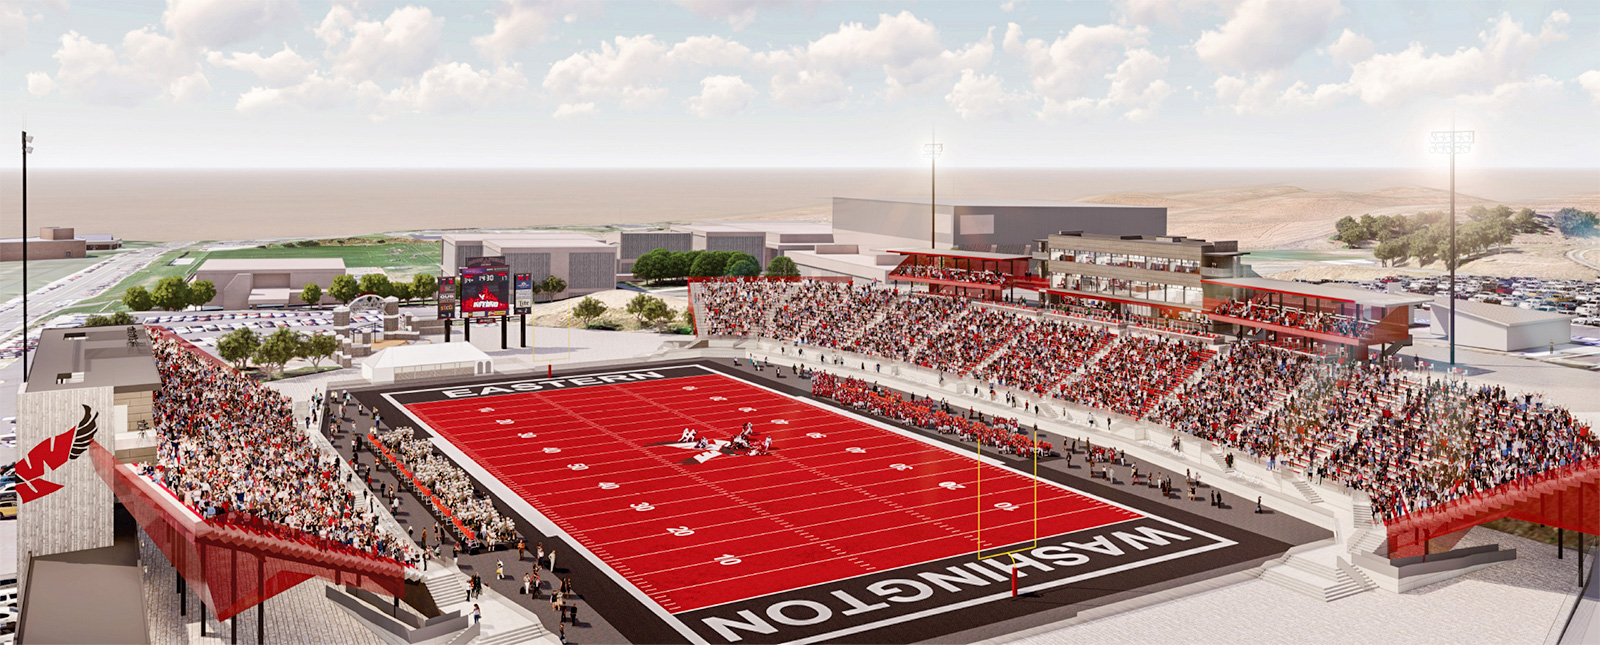 Rendering of the proposed stadium renovation